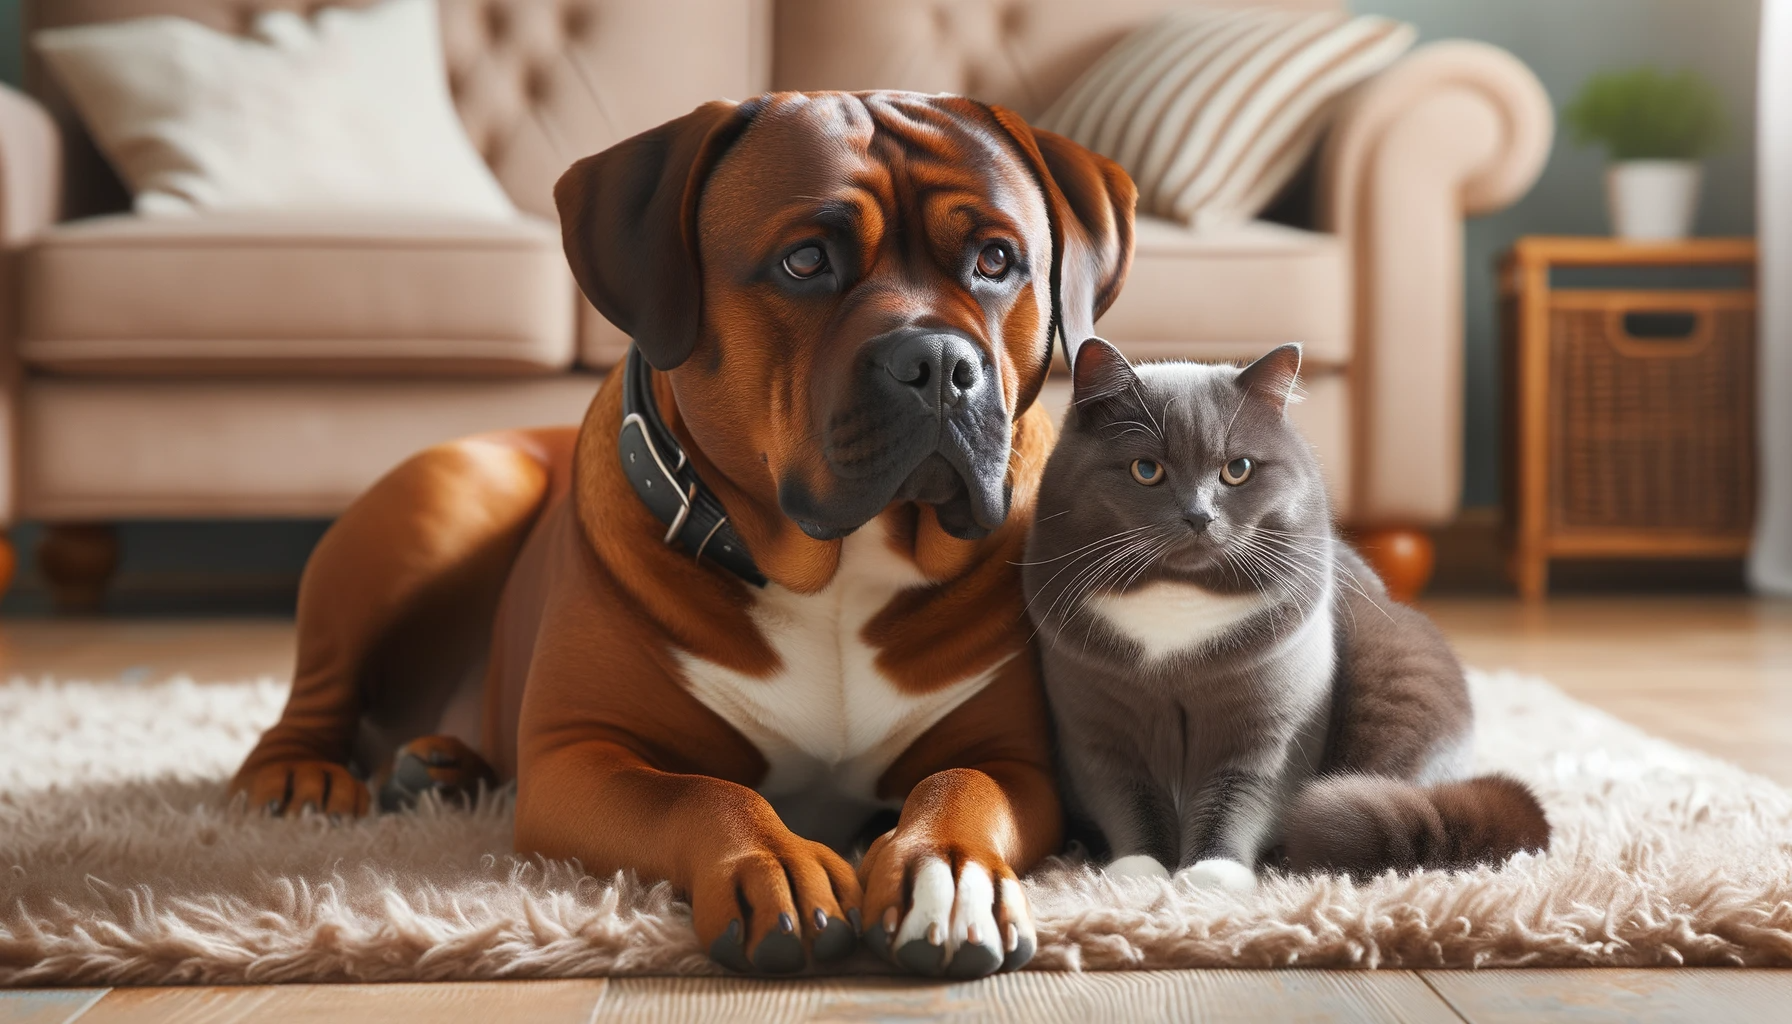 Photo of a calm Bullador dog and a sleek-furred cat sharing a serene moment together. They are sitting side by side on a soft rug, with the dog gently resting its head near the cat, showcasing the Bullador's easygoing temperament. The background is a cozy living room, highlighting the harmony between the two pets.